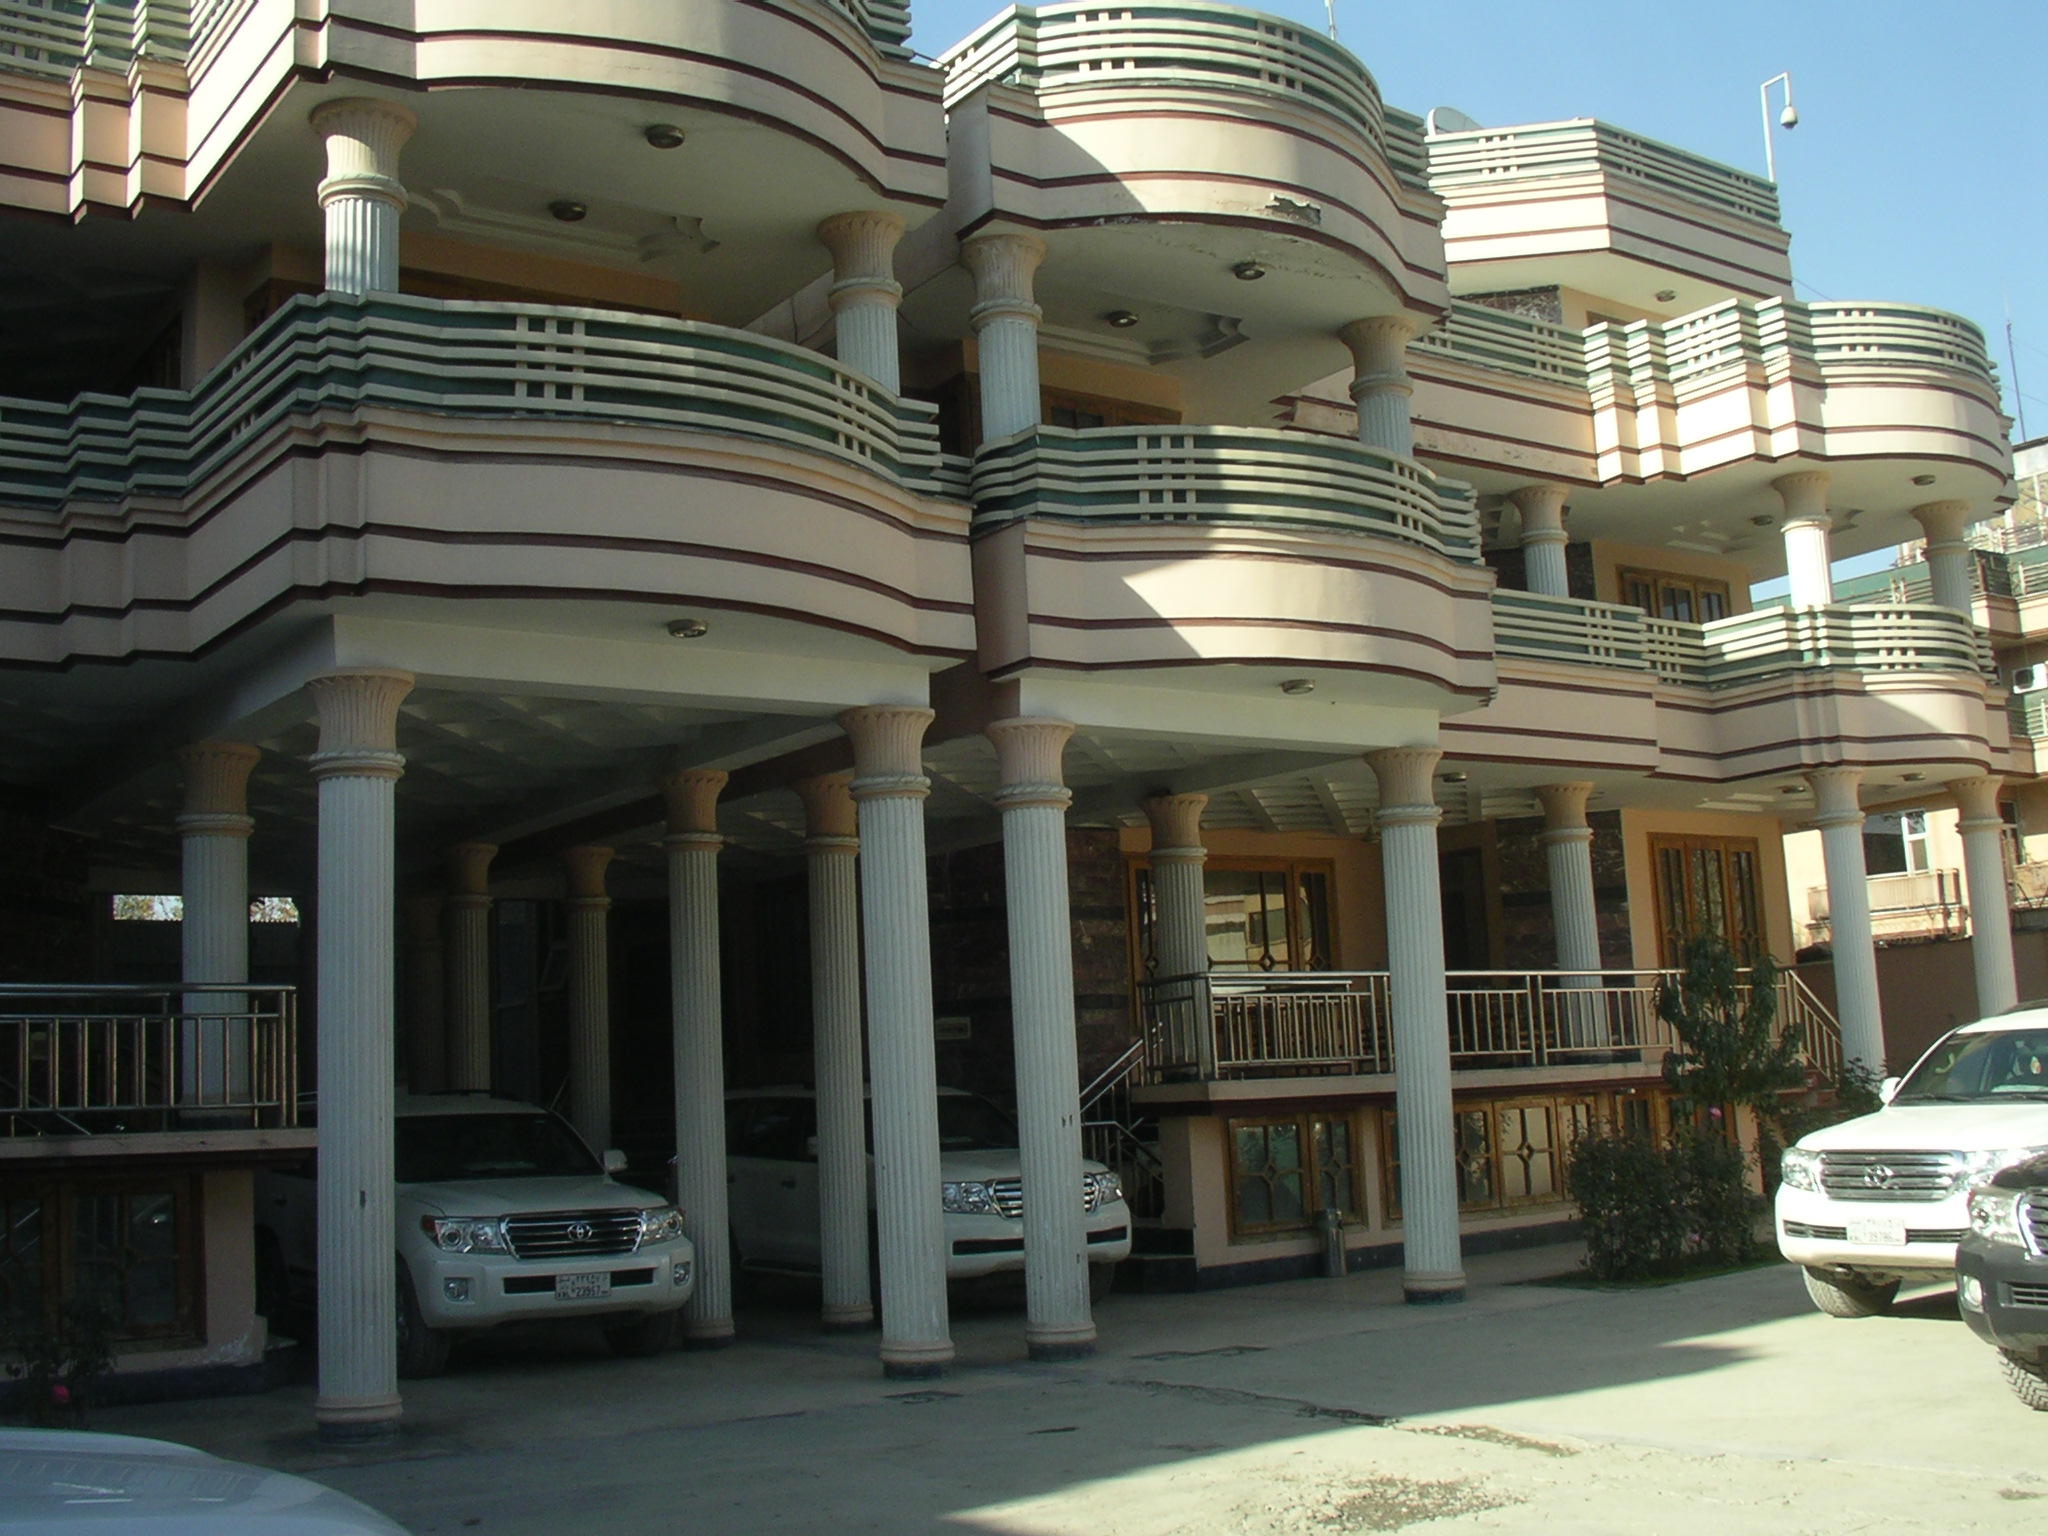 American tax dollars went toward lavish housing for U.S. government employees in Afghanistan. 